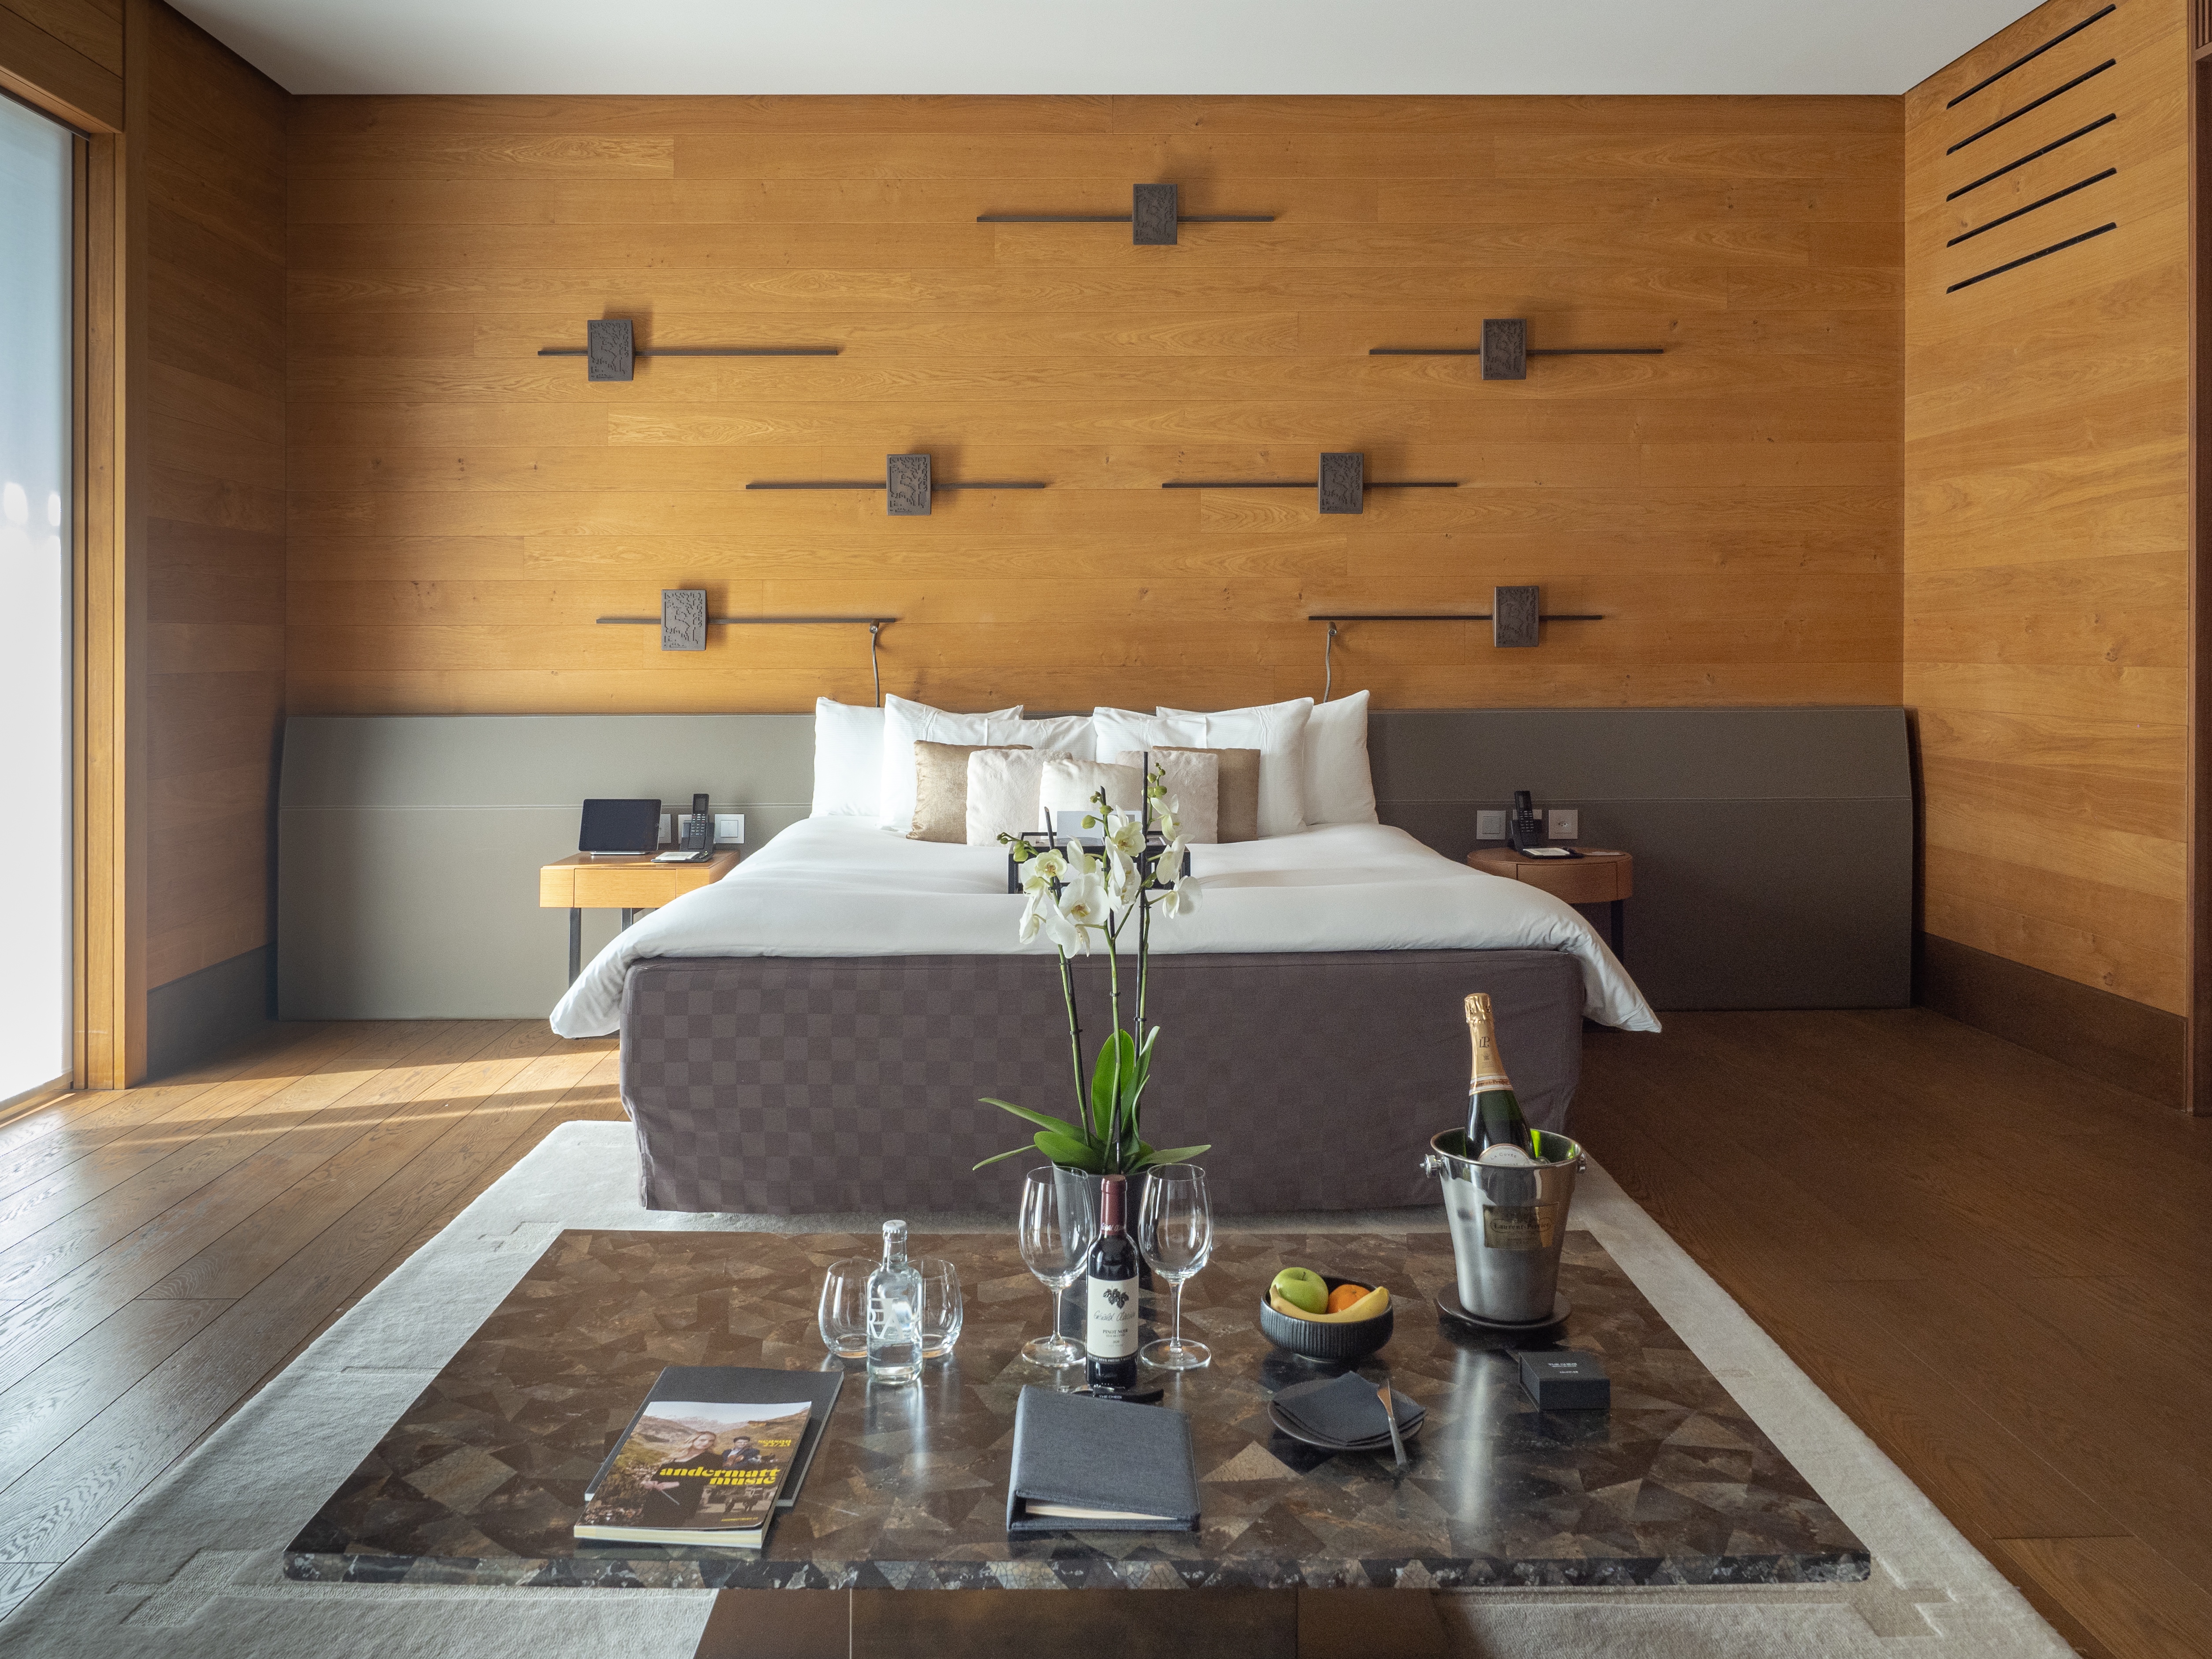 A deluxe room at the Chedi Andermatt